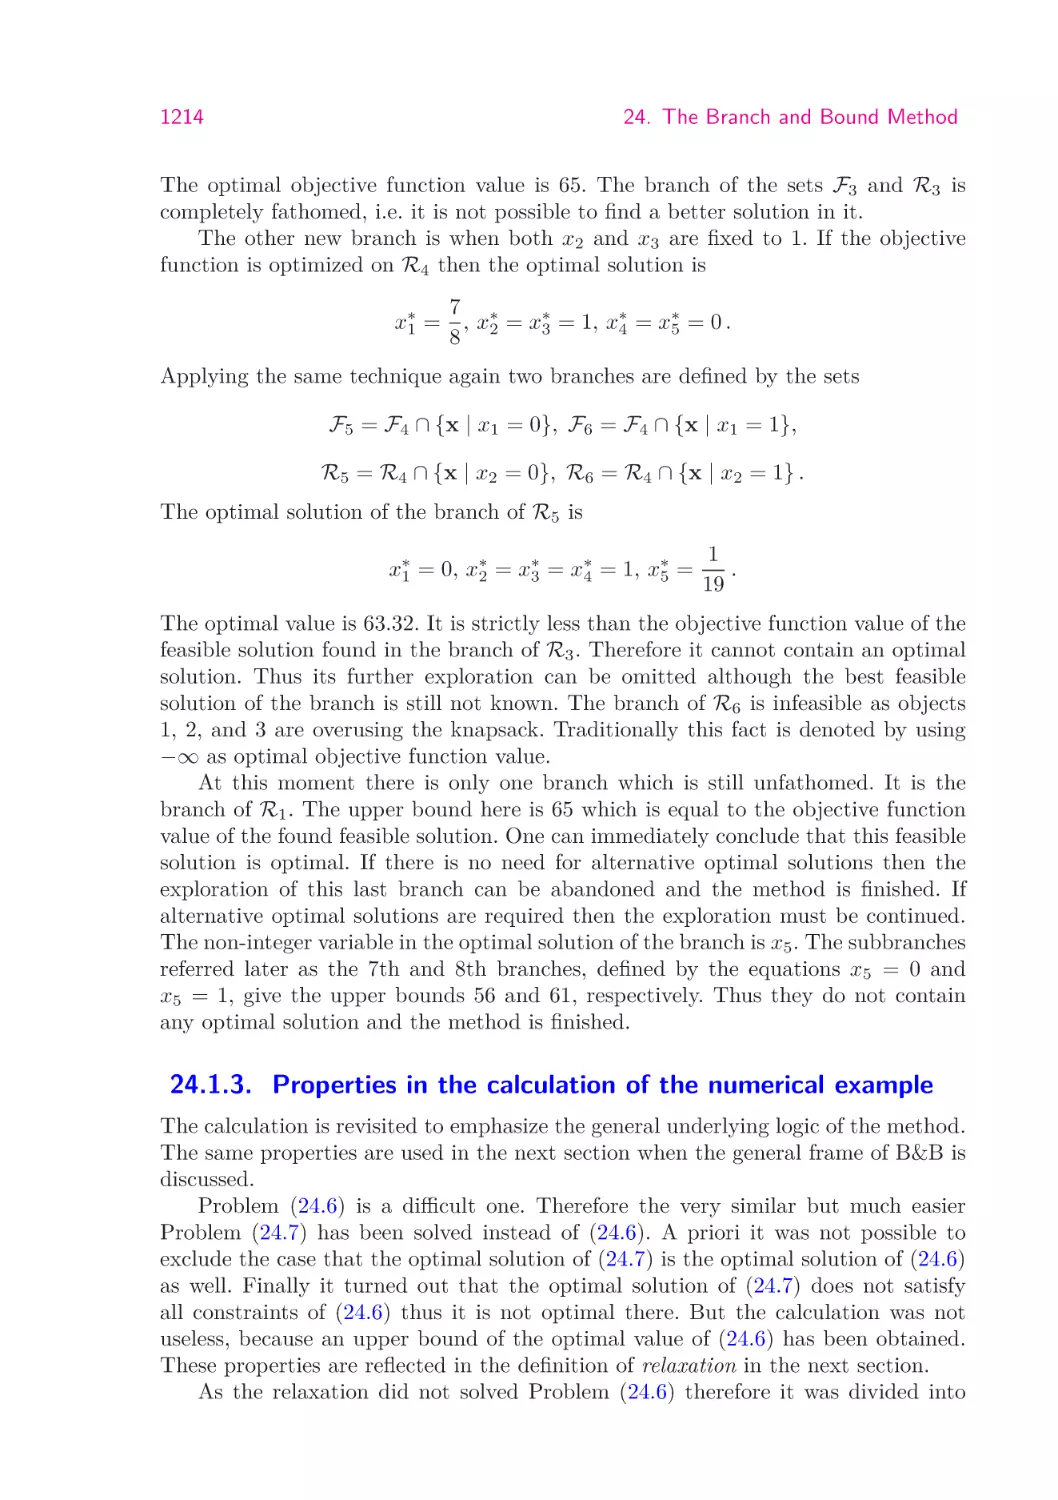 24.1.3.  Properties in the calculation of the numerical example